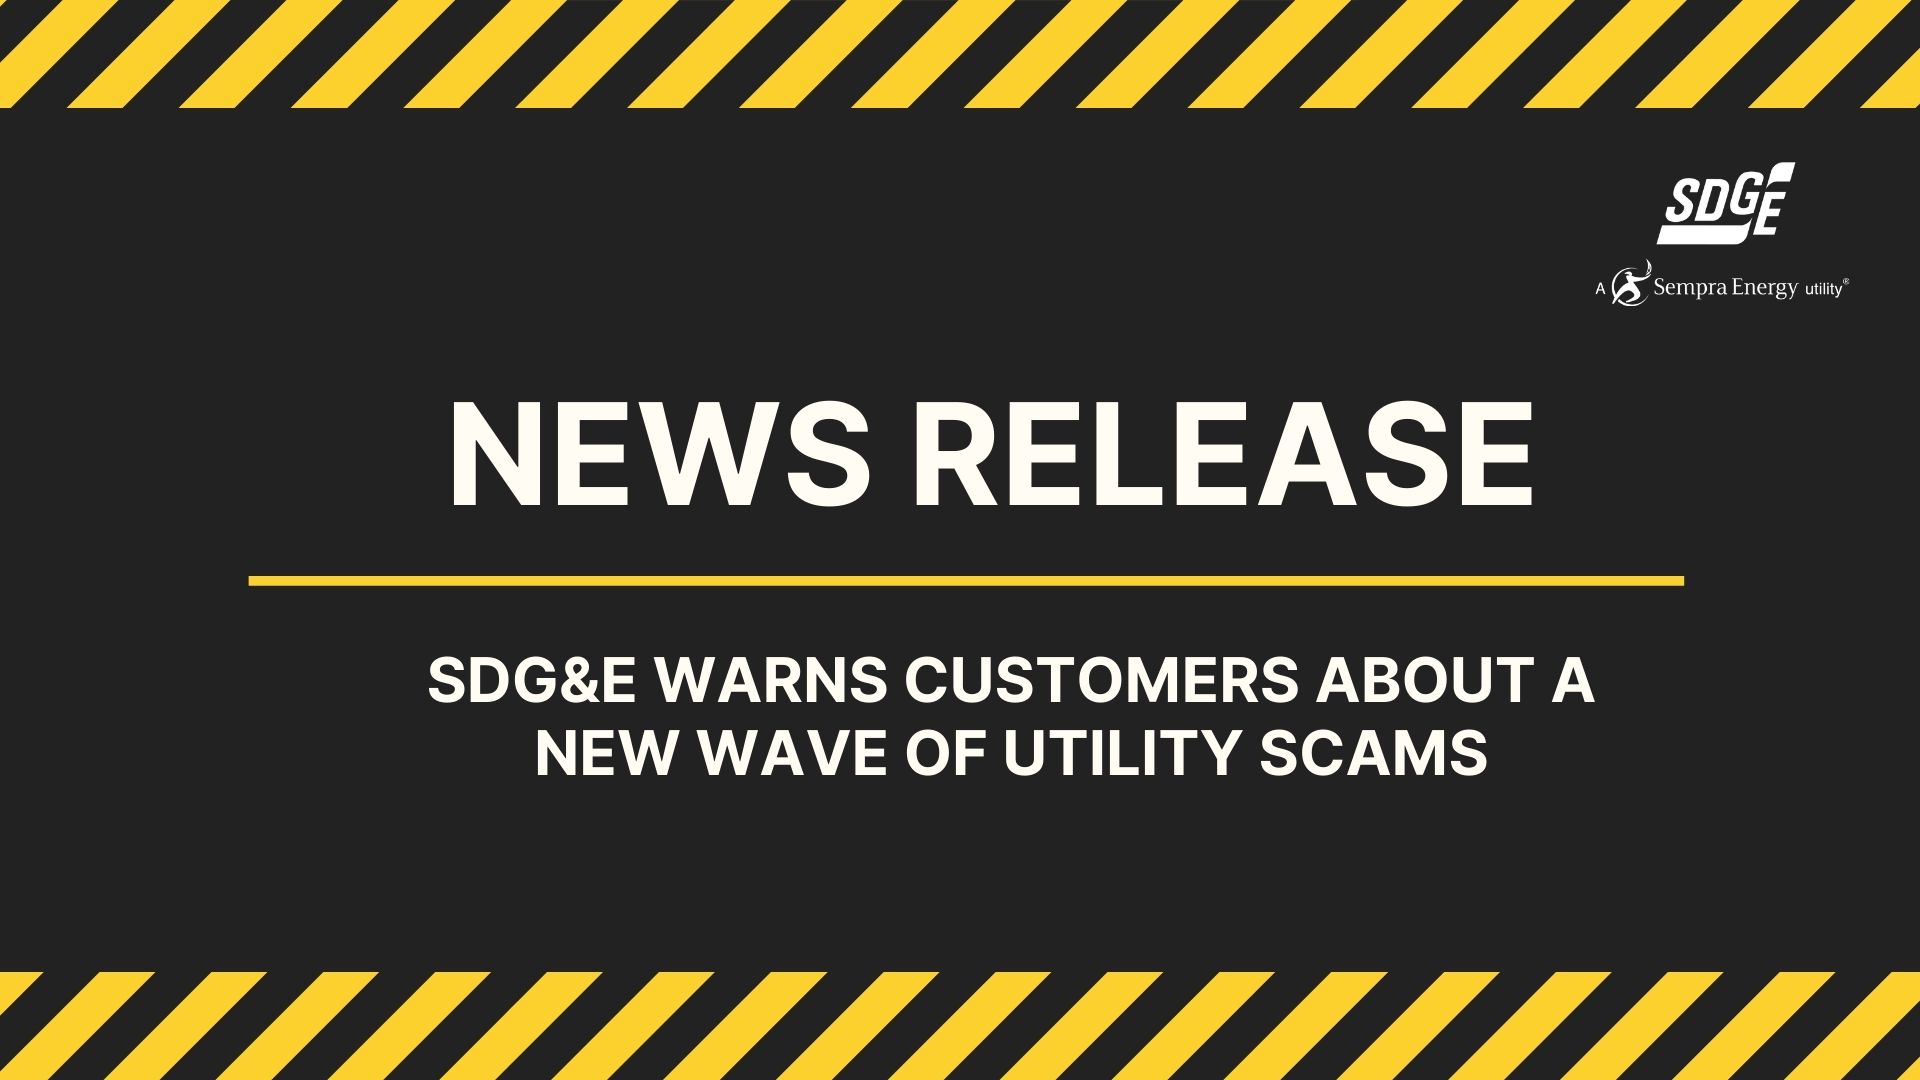 SDG&E Warns Customers About A New Wave Of Utility Scams